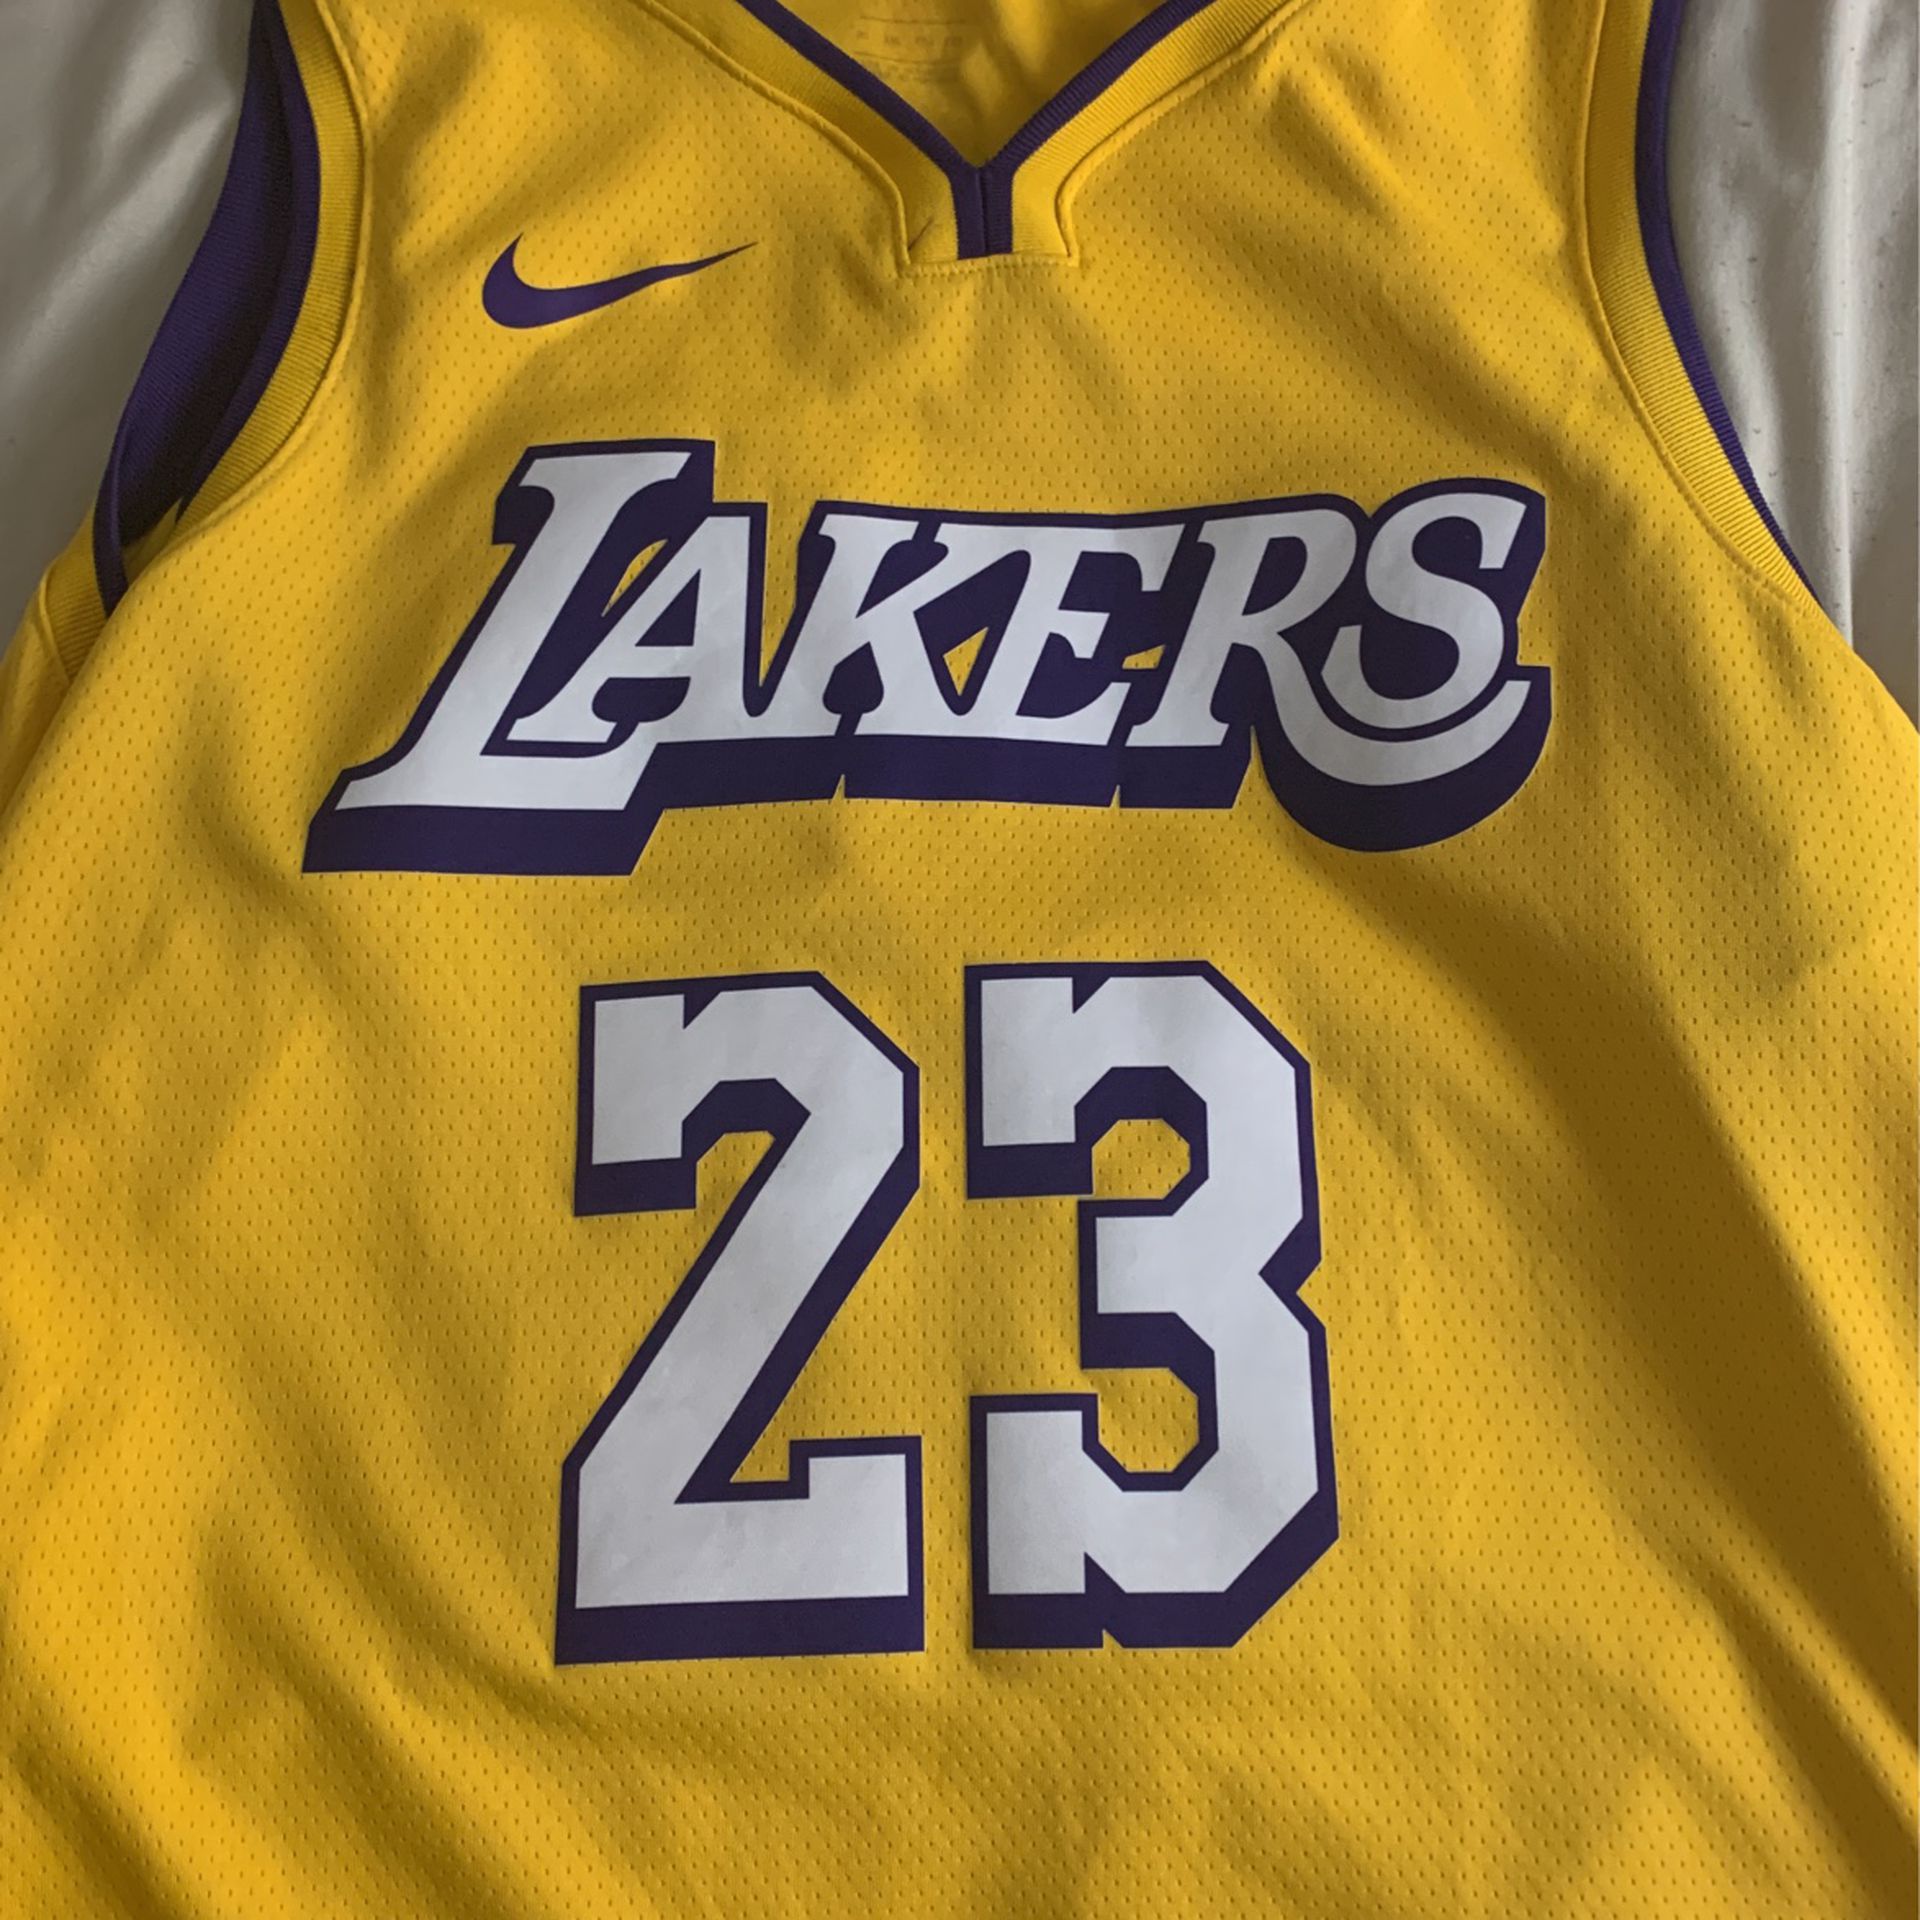 Lebron James Number 23 Laker City Jersey Size 2x for Sale in Las